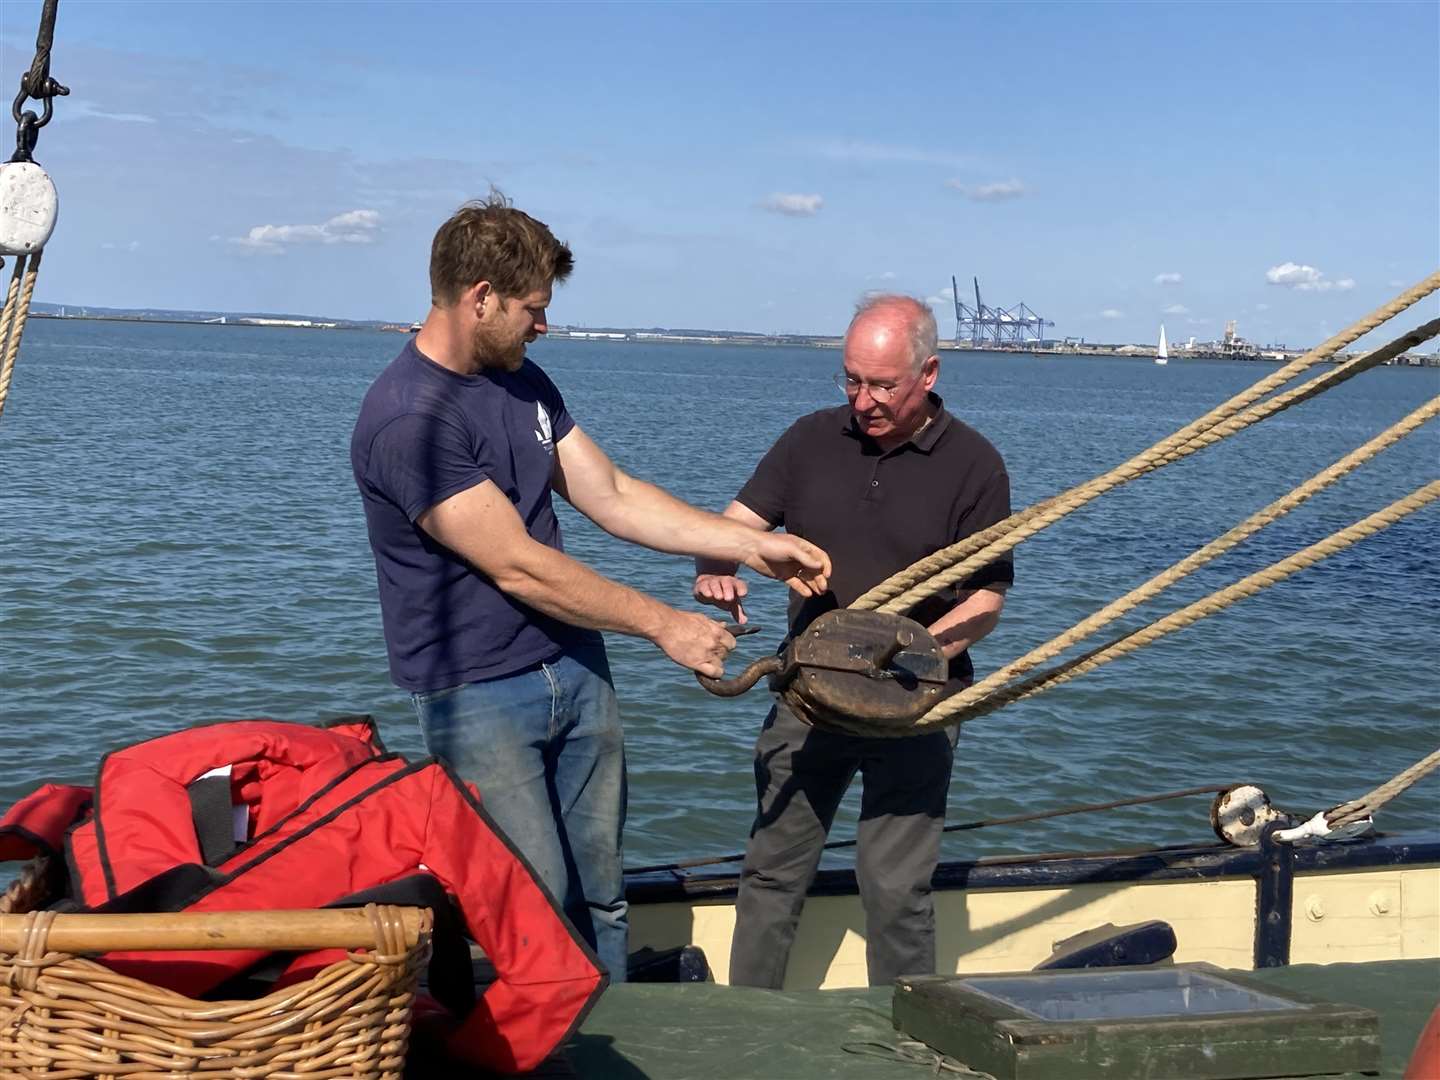 Richard Murr gets some instruction from Ed Gransden aboard the Thames sailing barge the Edith May